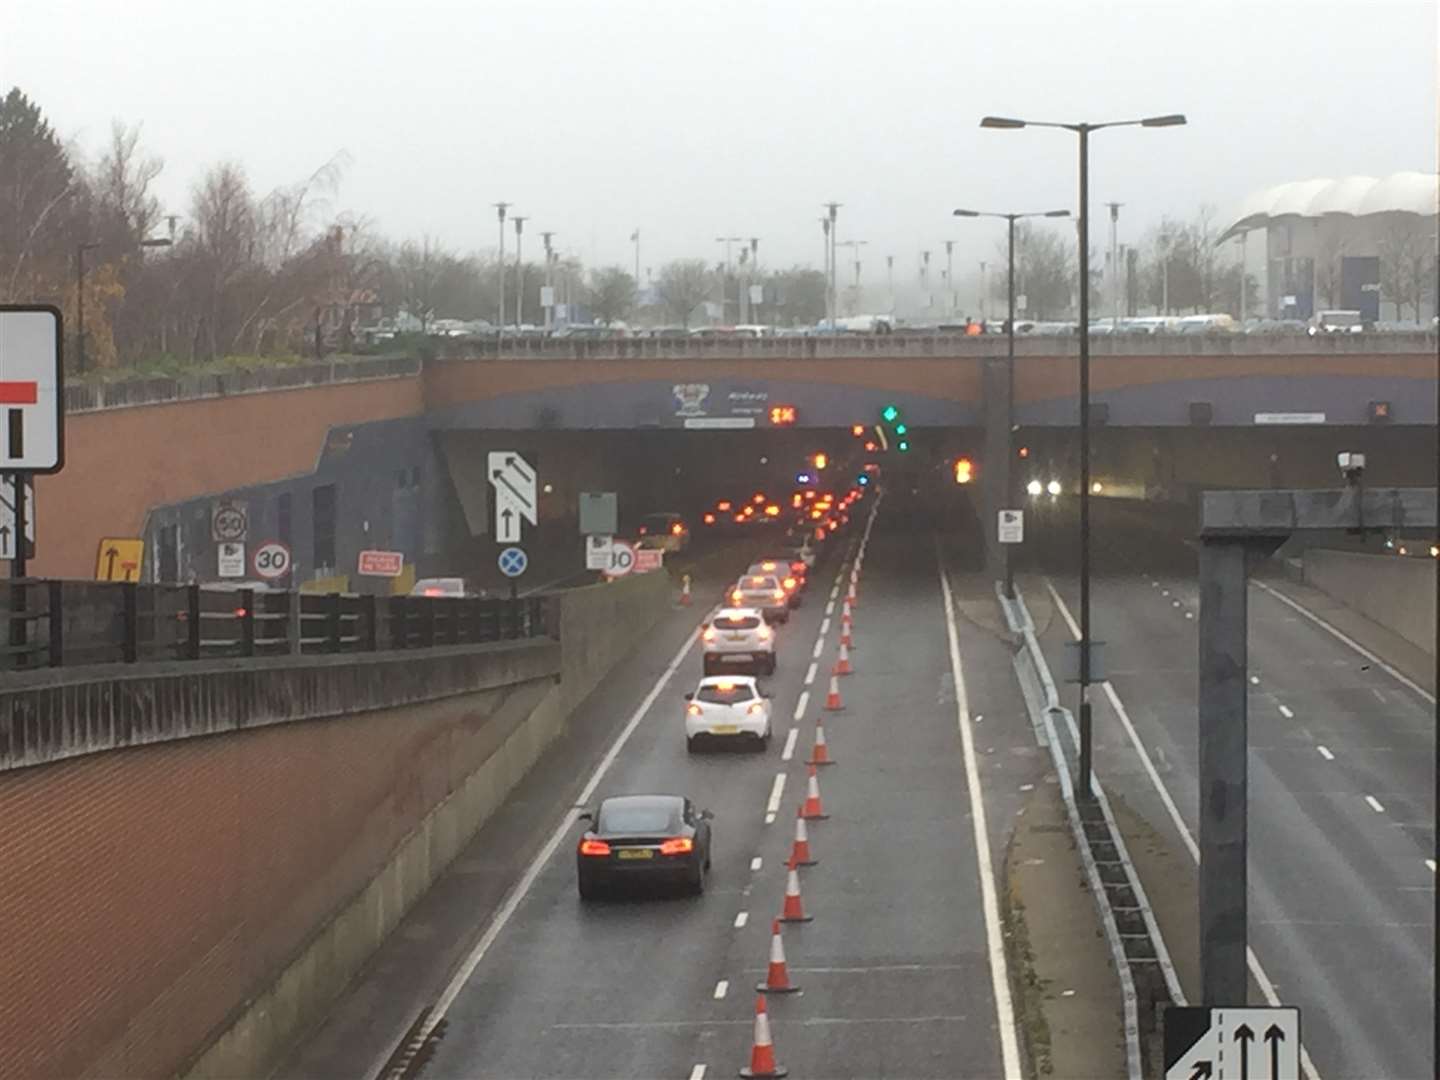 The Medway Tunnel will be closed for 10 nights for resurfacing works